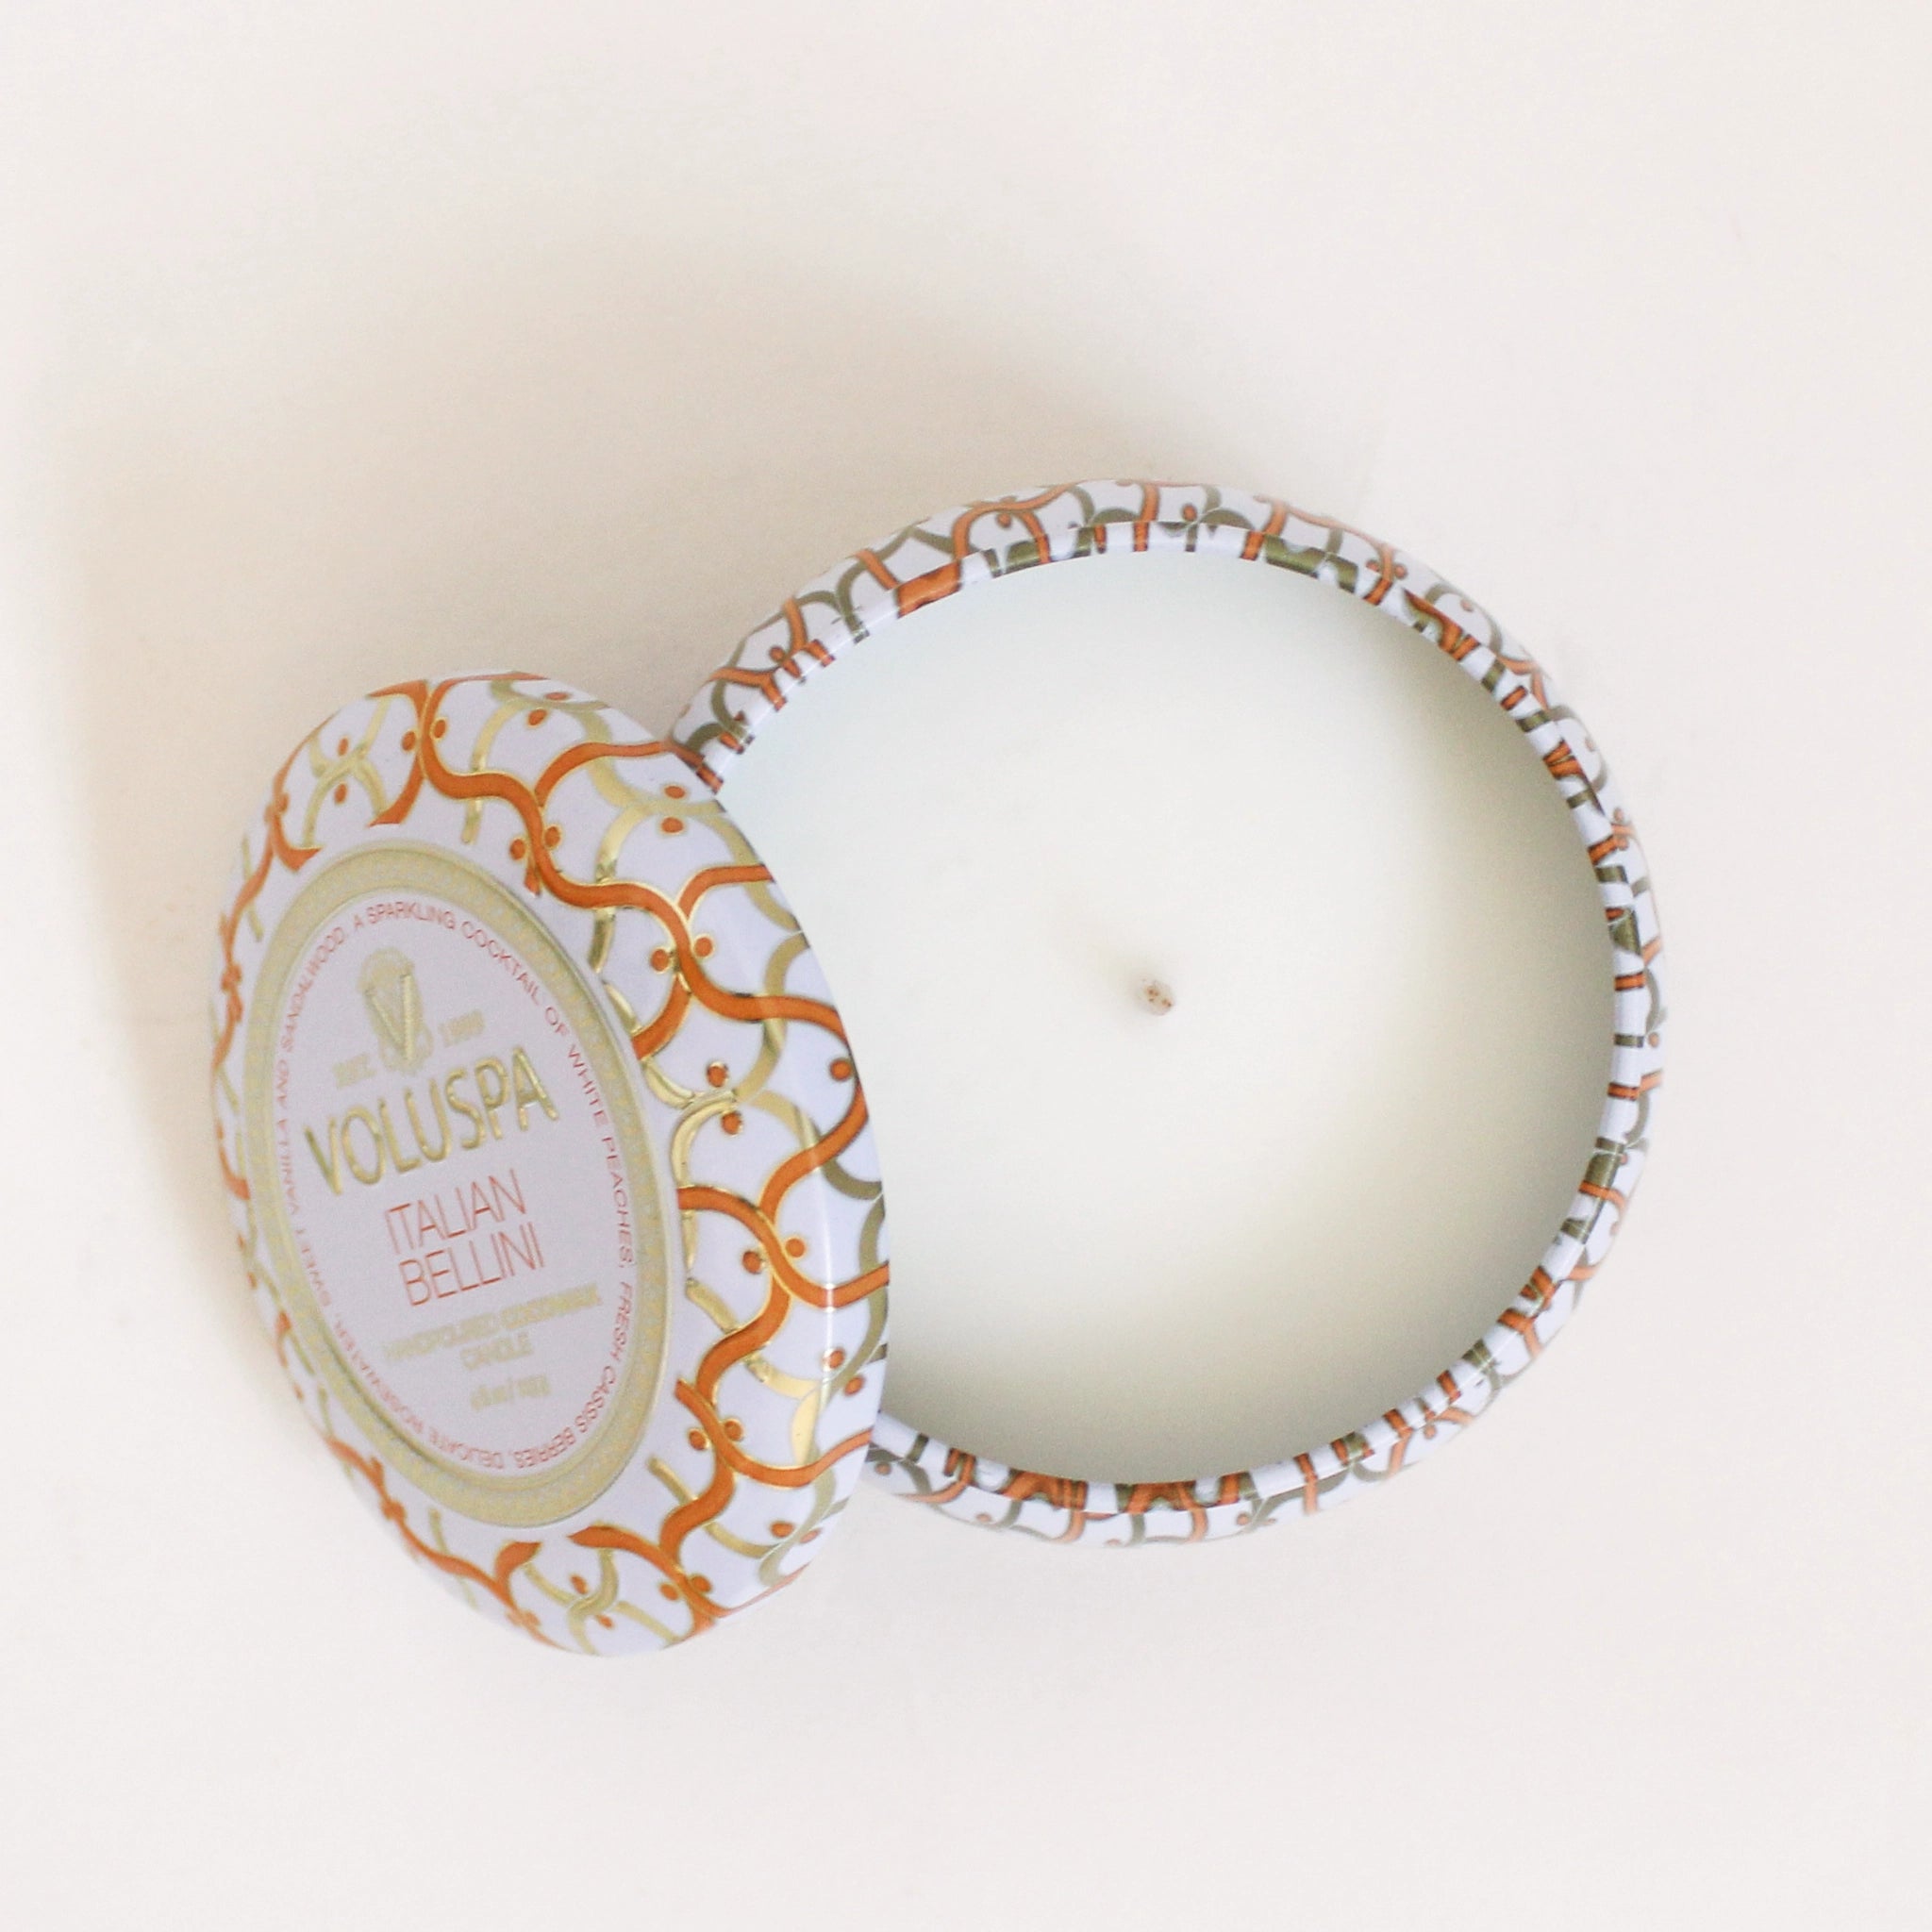 On a cream background is a orange and white tin that contains a single wick candle along with a circle label in the center of the lid that reads, &quot;Voluspa Italian Bellini&quot;.